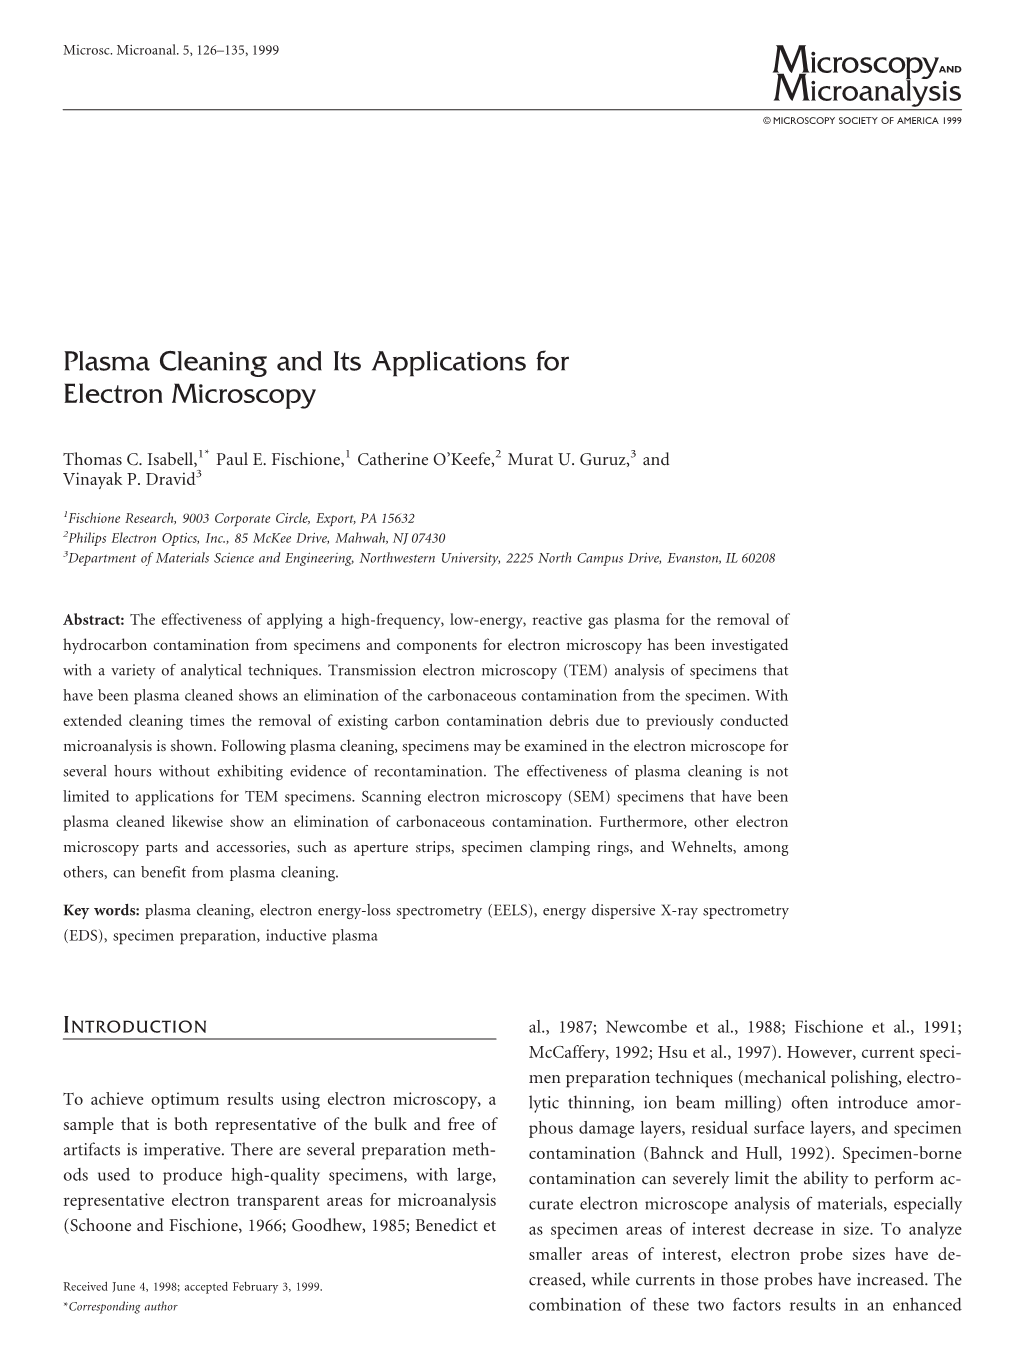 Plasma Cleaning and Its Applications for Electron Microscopy